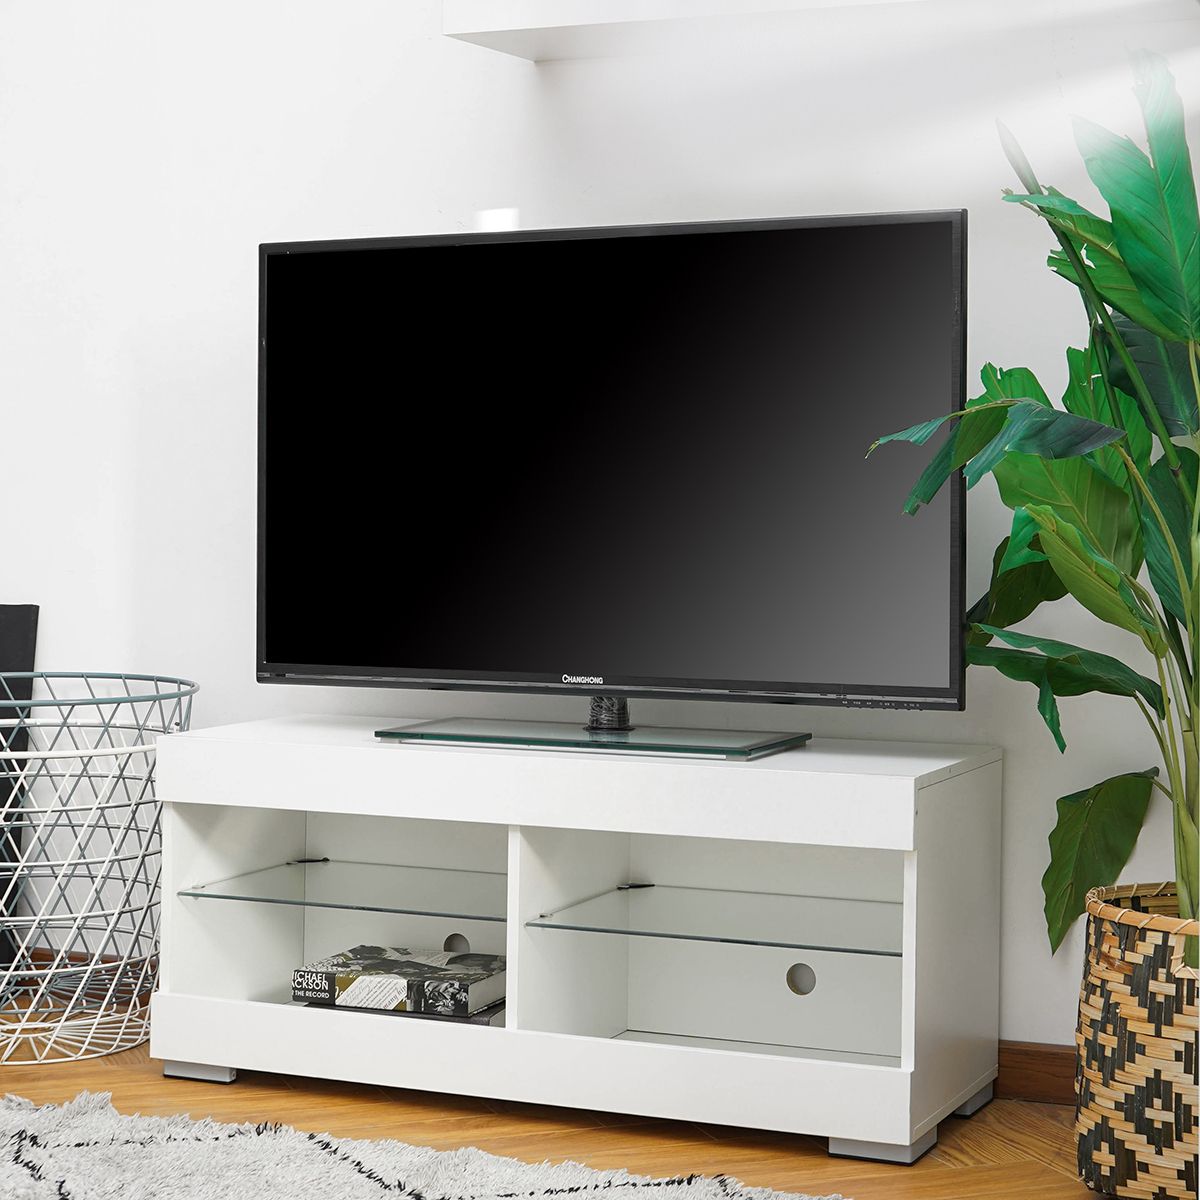 Wood Television Stand Modern Tv Stand Cabinet With Led Throughout Glass Shelves Tv Stands (View 2 of 15)